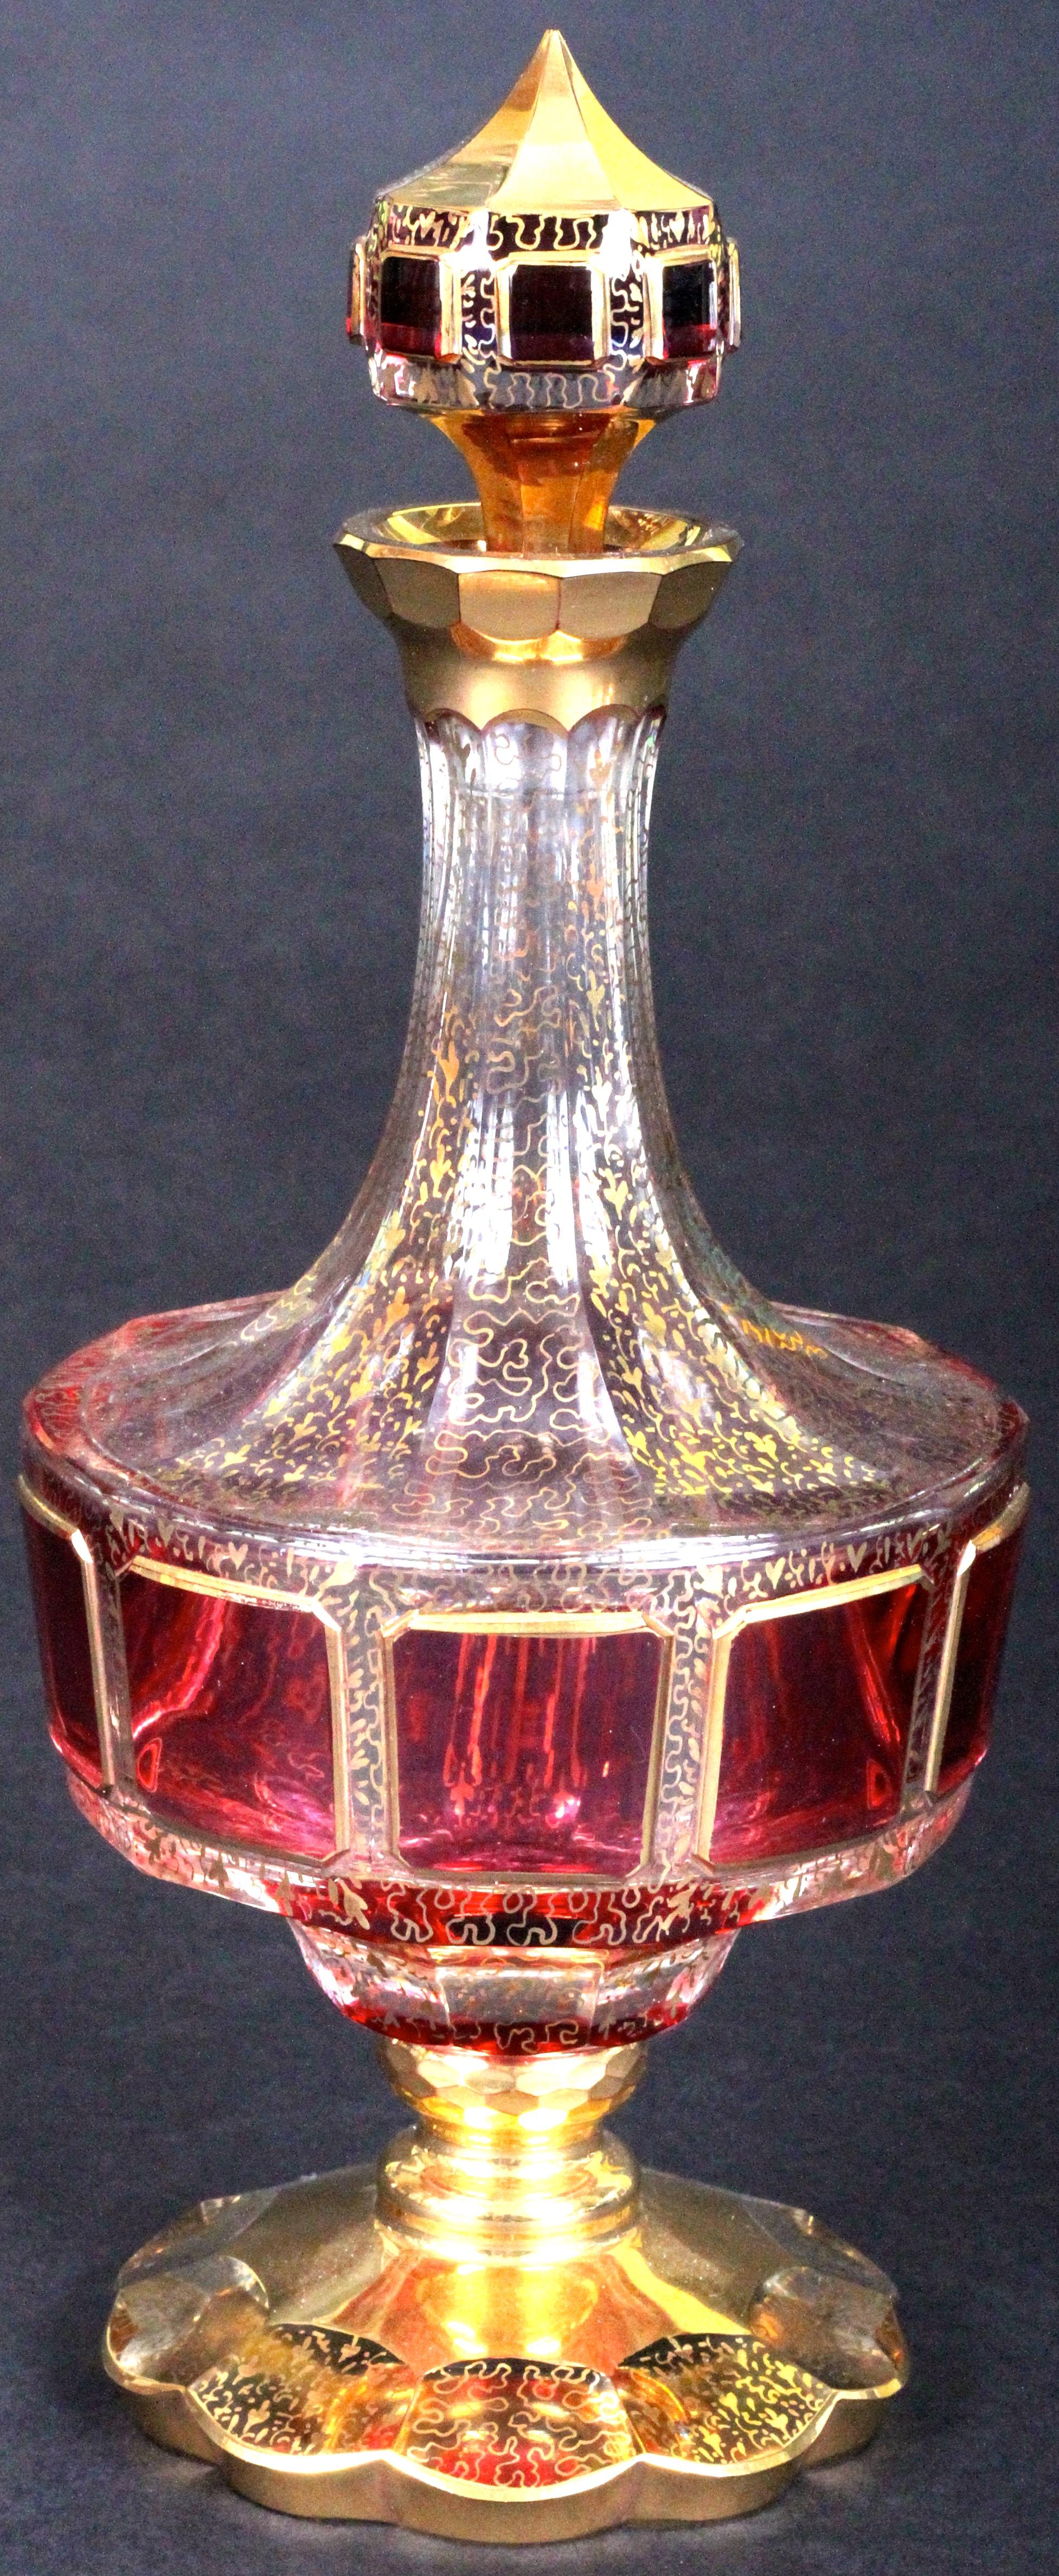 Here is a lovely Bohemian cranberry cordial set consisting of a decanter and 6 glasses, made by Moser Glass, Czech Republic.

The decanter and glasses feature raised panels of rich cranberry cabochon 